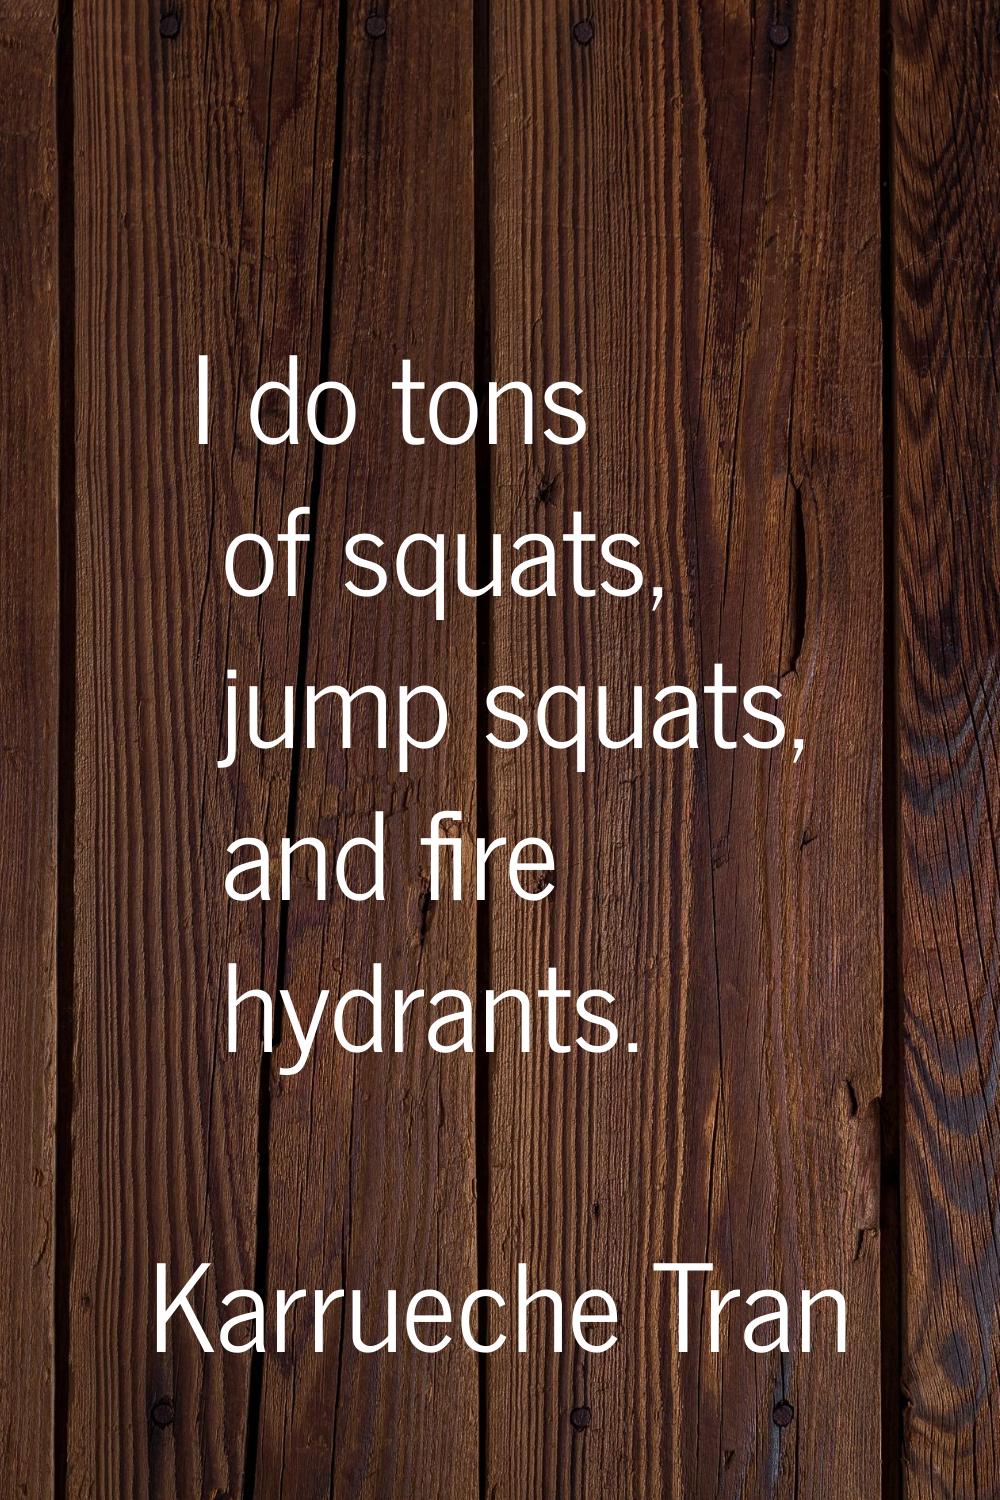 I do tons of squats, jump squats, and fire hydrants.